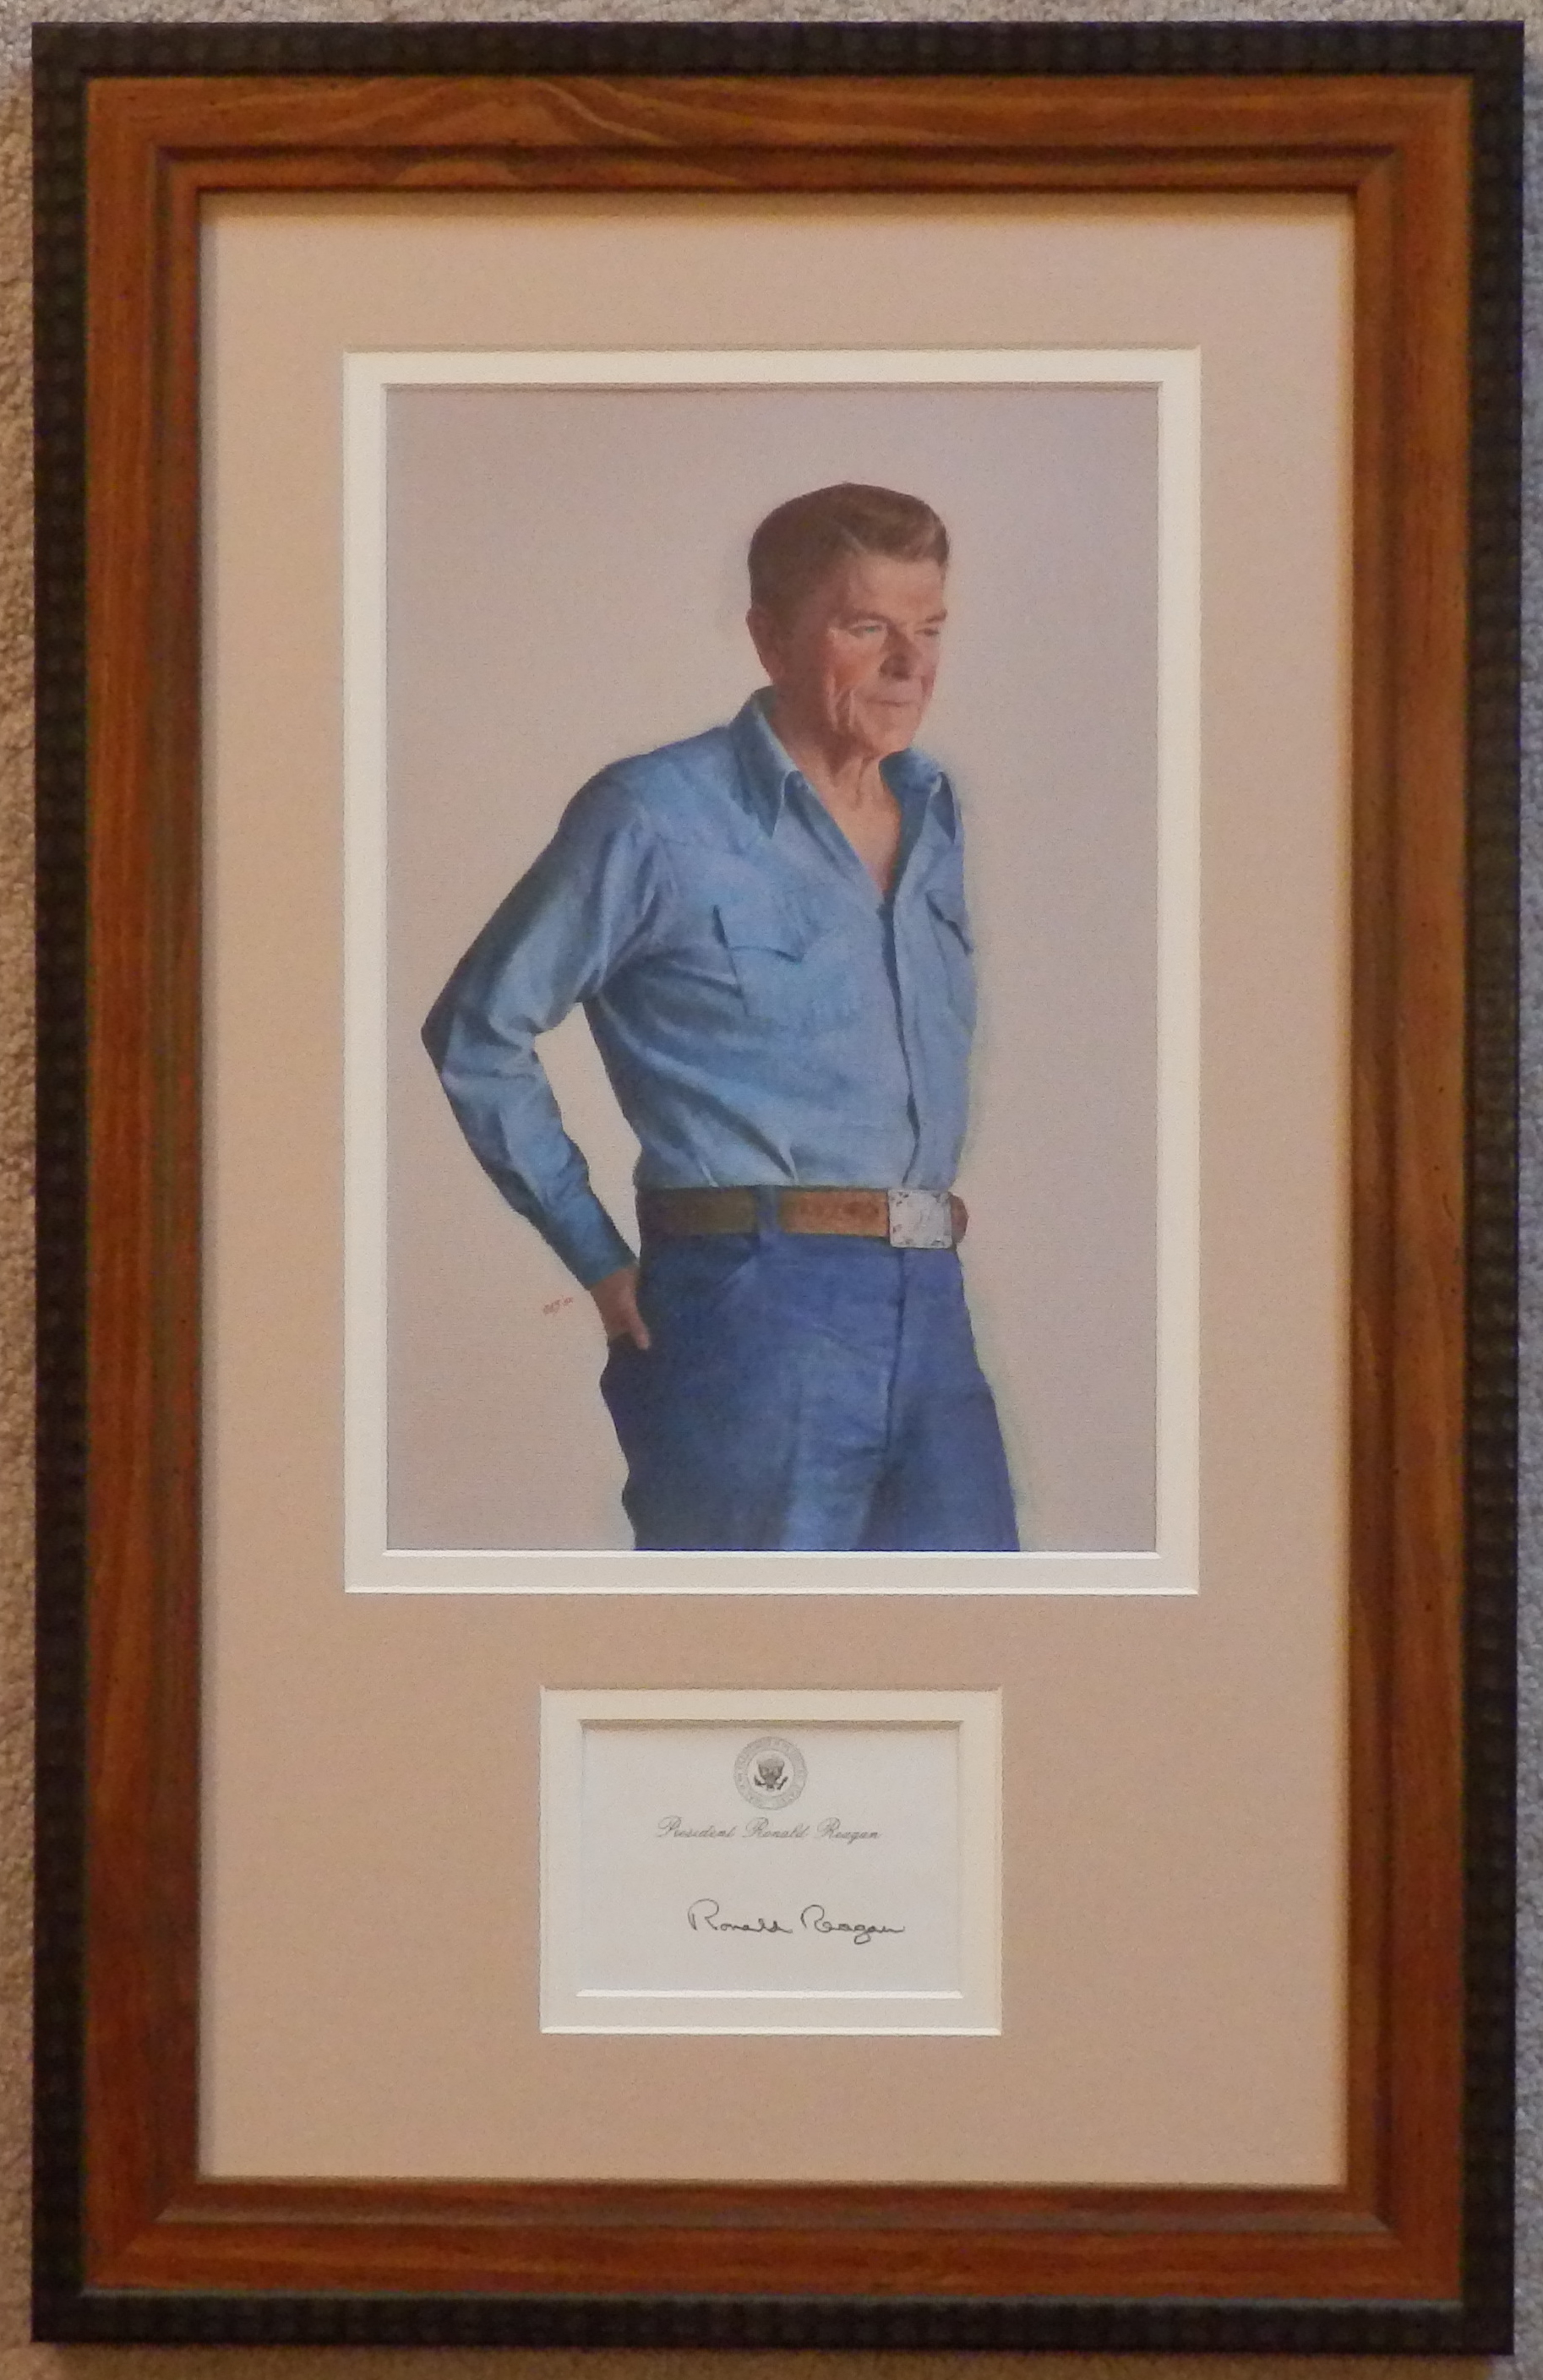 Ronald Reagan Time Magazine Man of the Year Cover Photo Giclee with Signed Post-It-Note